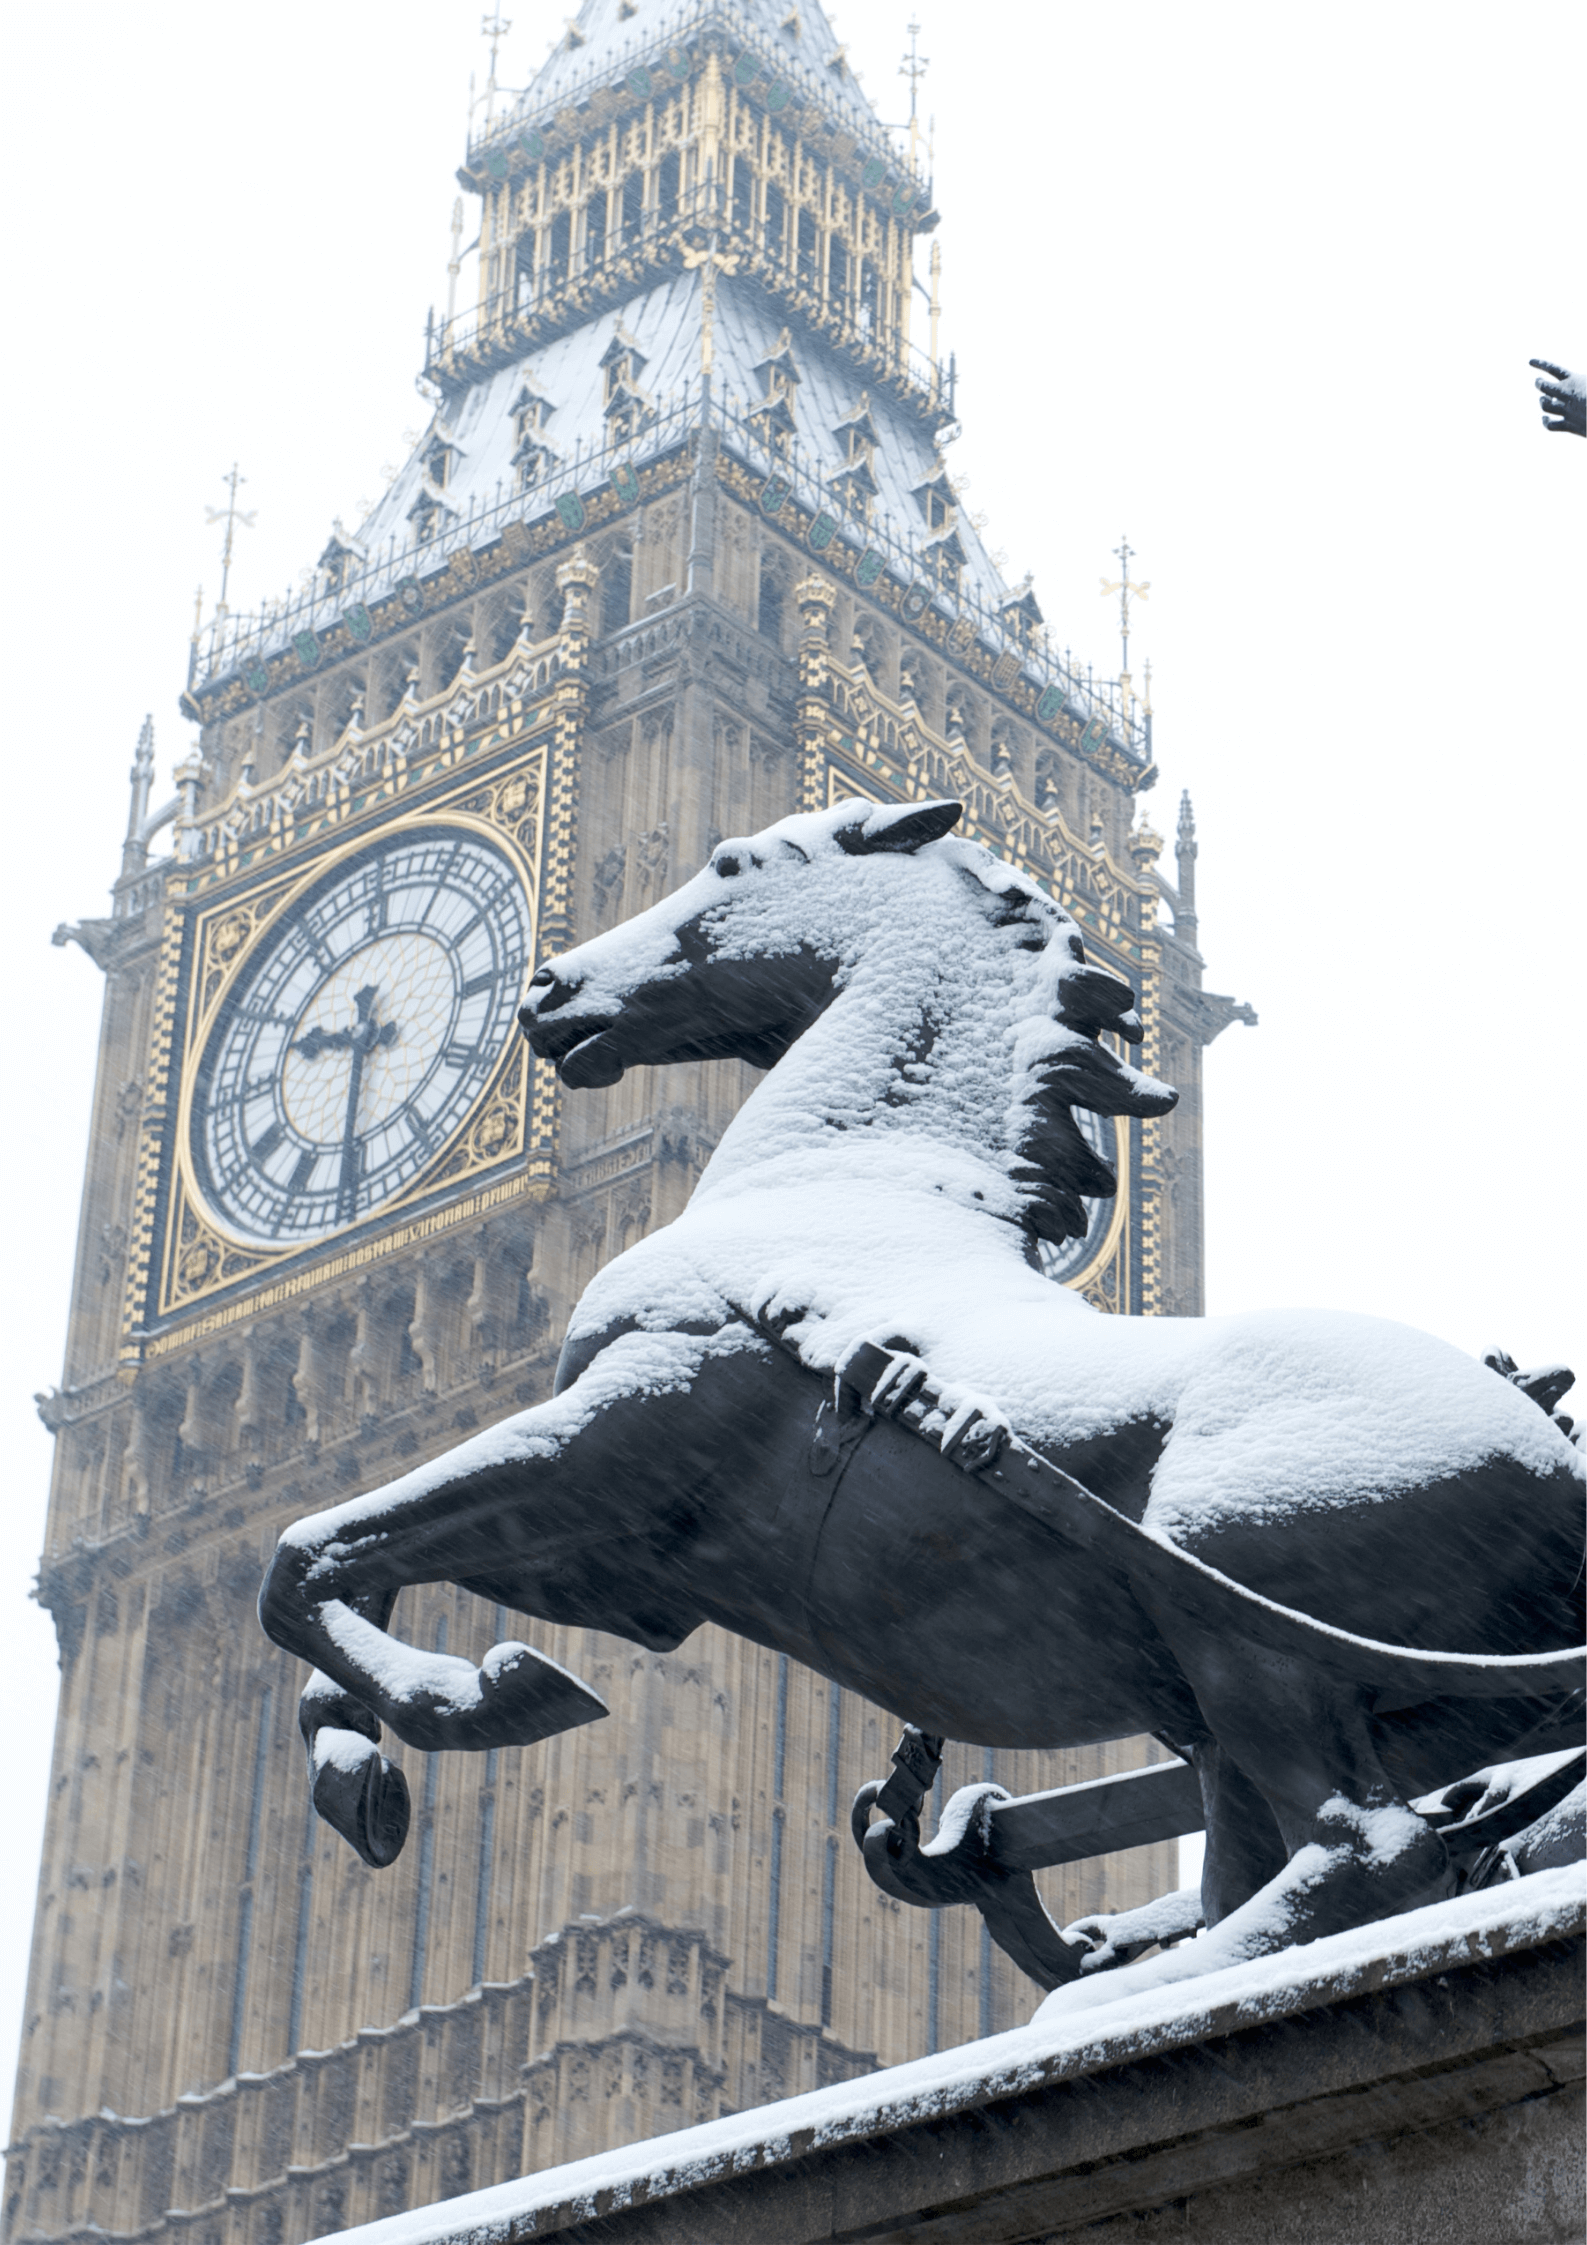 Snow on a statue in London, Big Ben, England 